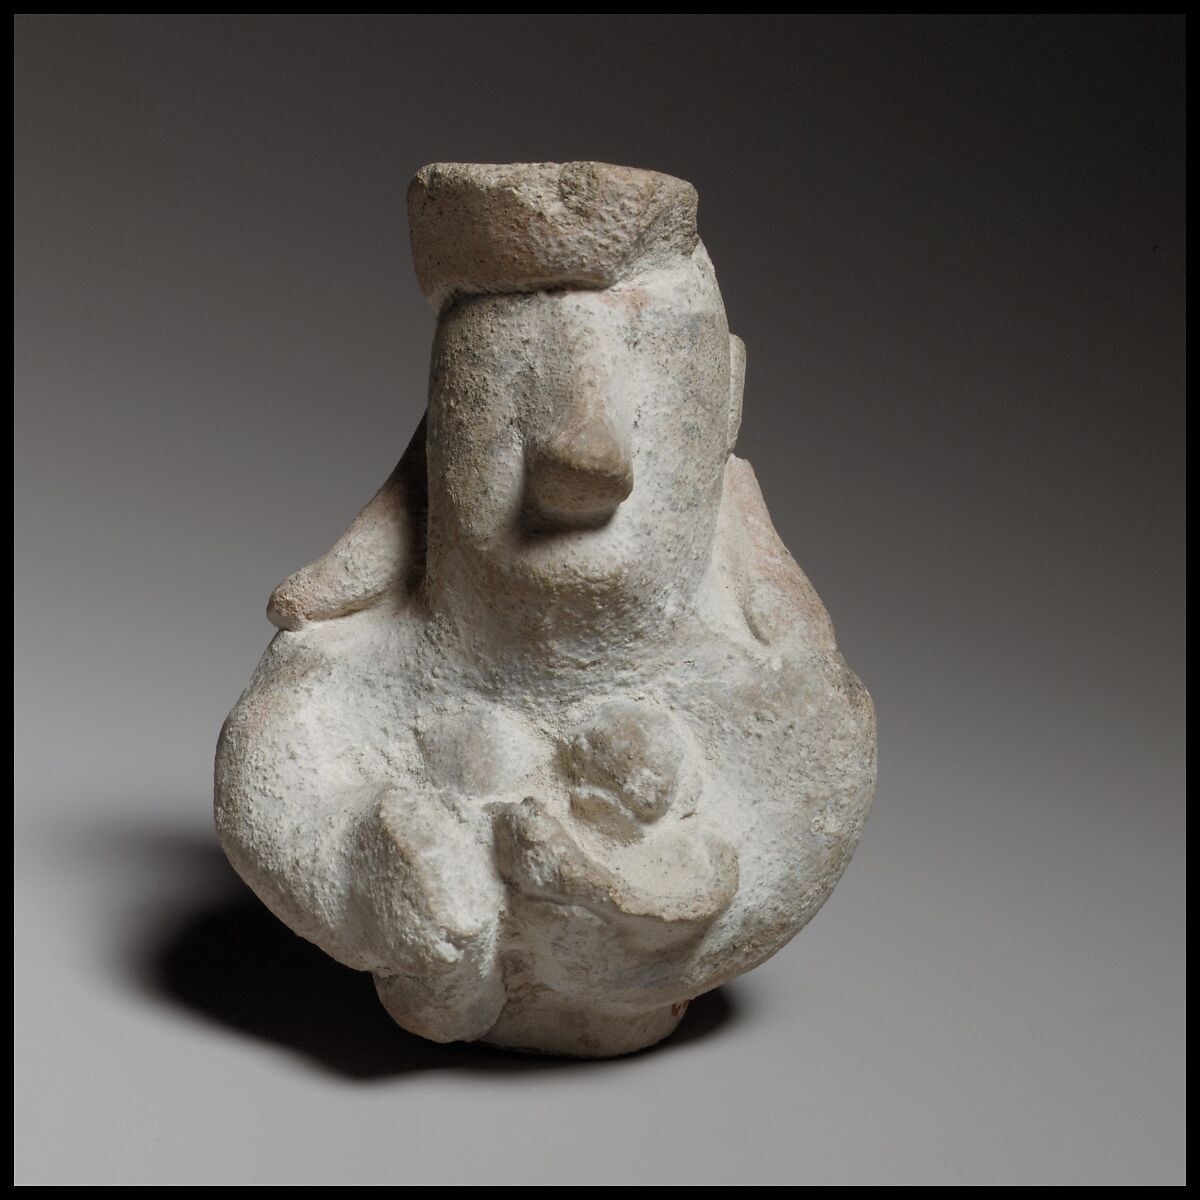 Head and upper body of a female figurine, Terracotta, Cypriot 